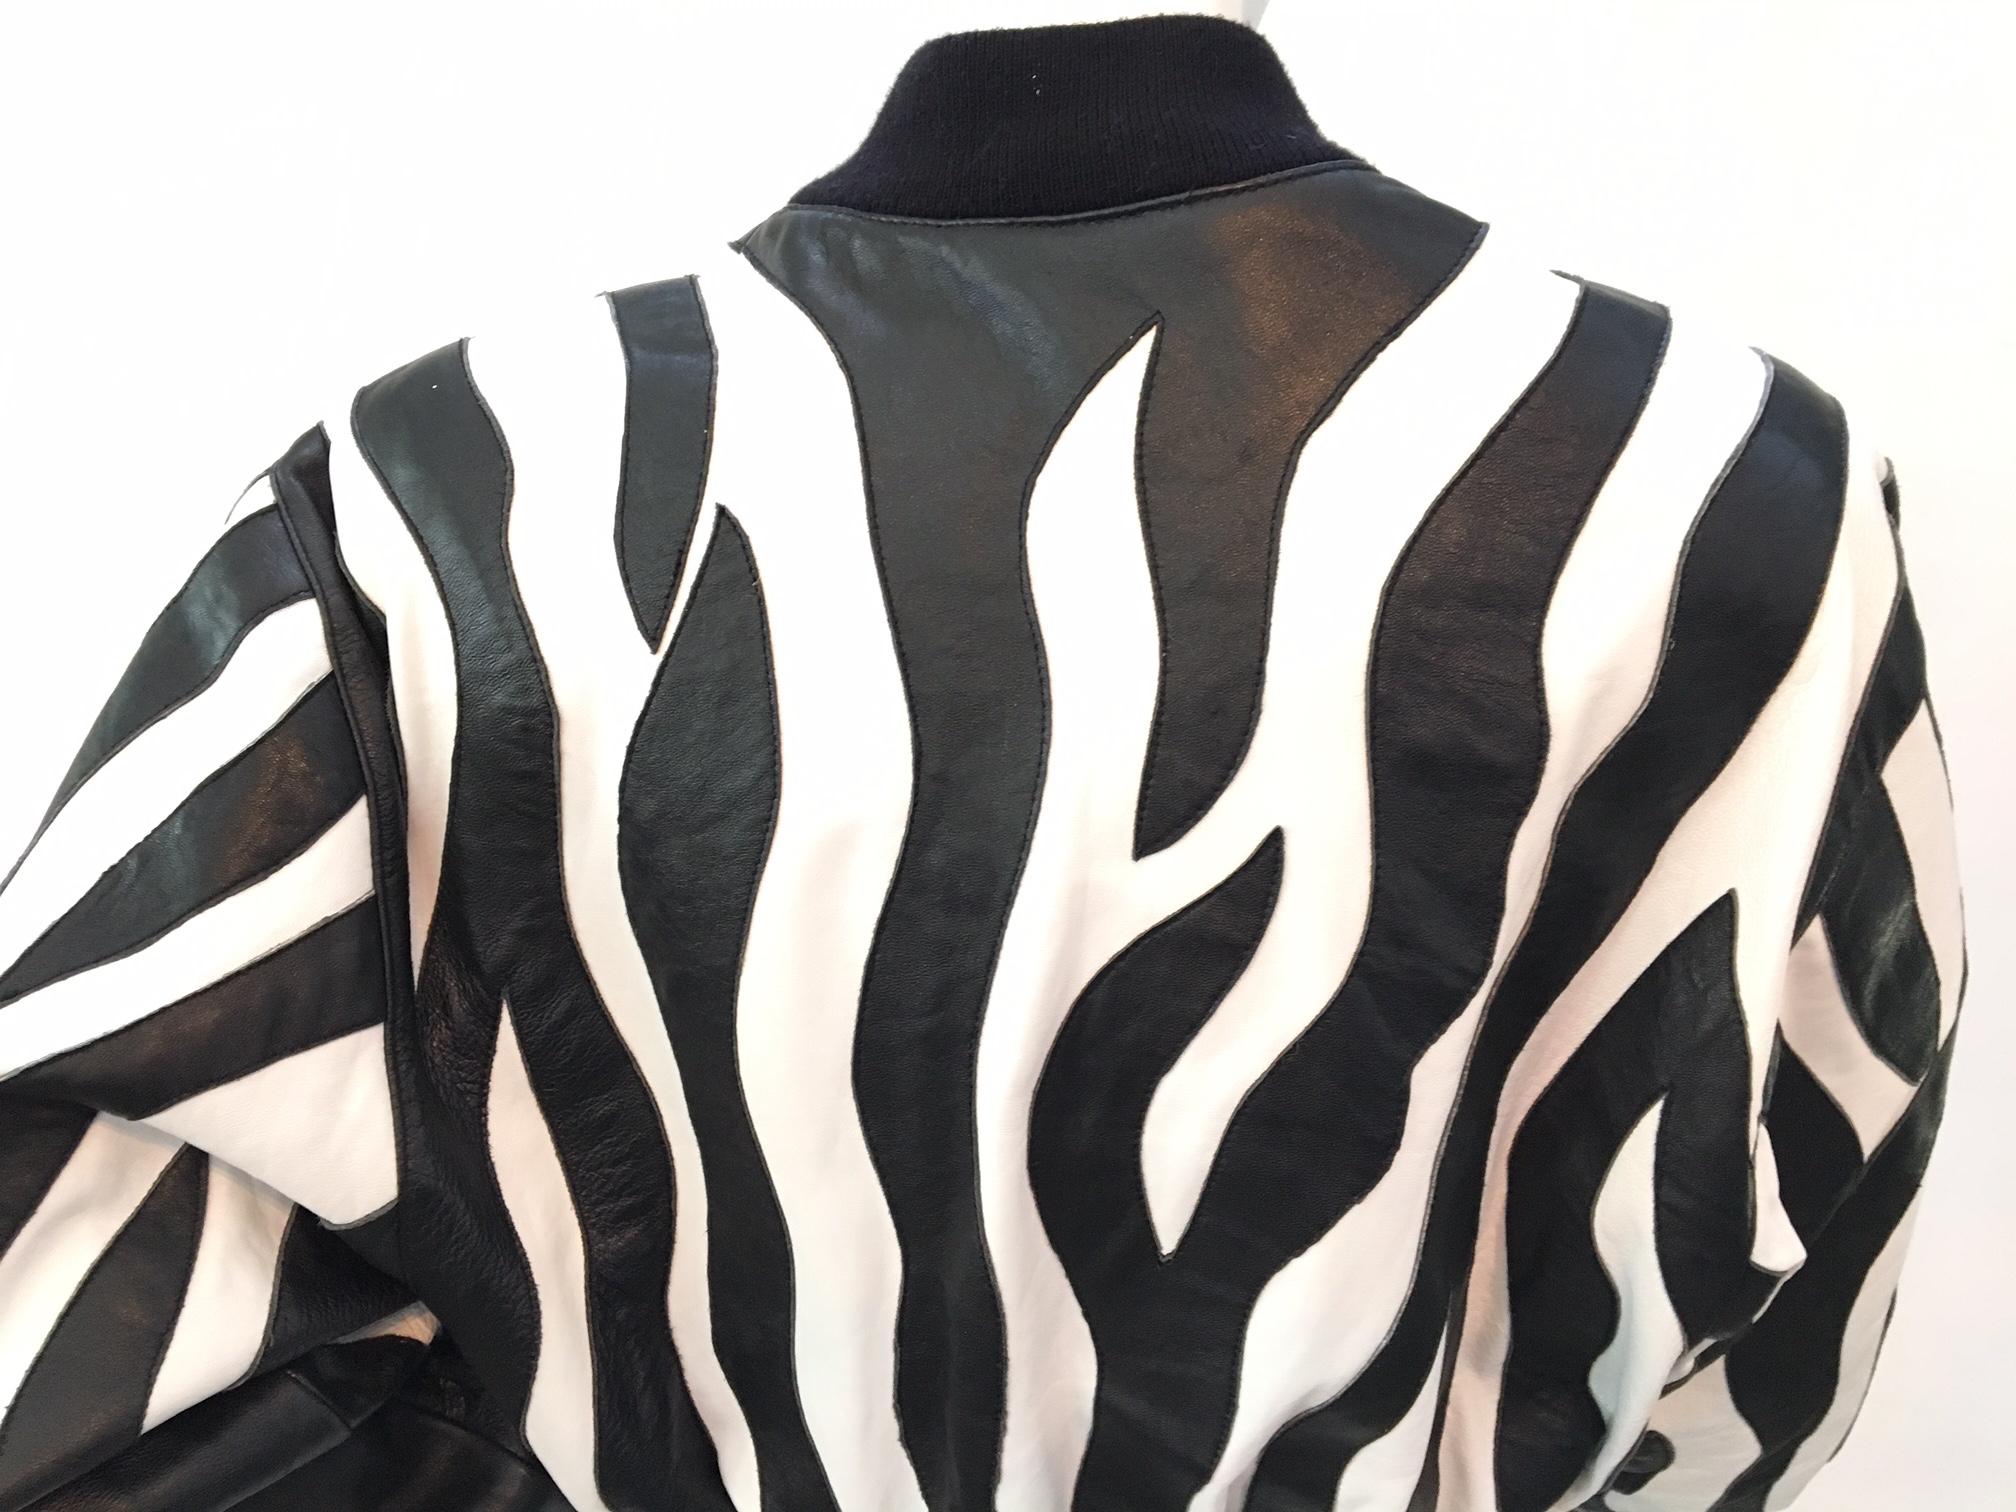 Vintage leather bomber jacket designed by Michael Hoban for North Beach Leather.  Classic 1980s black and white zebra design.  Zipper front closure.  Excellent condition, leather is soft and supple.  Elastic knit cotton cuffs, waist, and collar. 